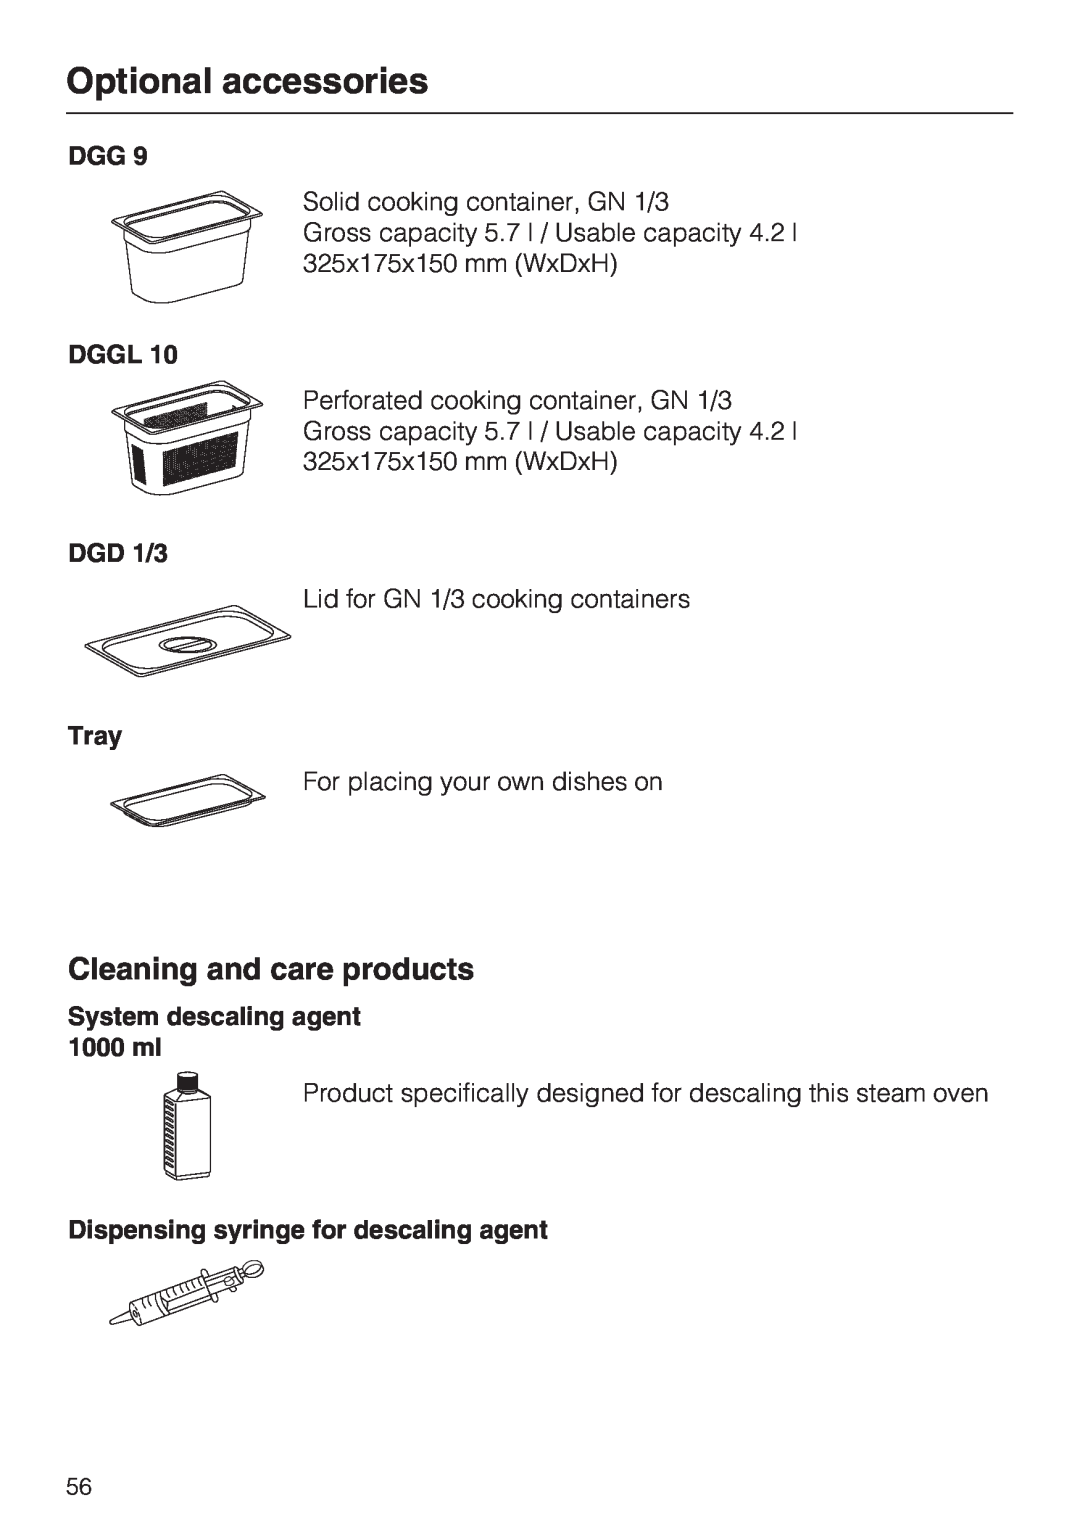 Miele DG 4064 Cleaning and care products, DGD 1/3, Tray, System descaling agent 1000 ml, Optional accessories, Dggl 